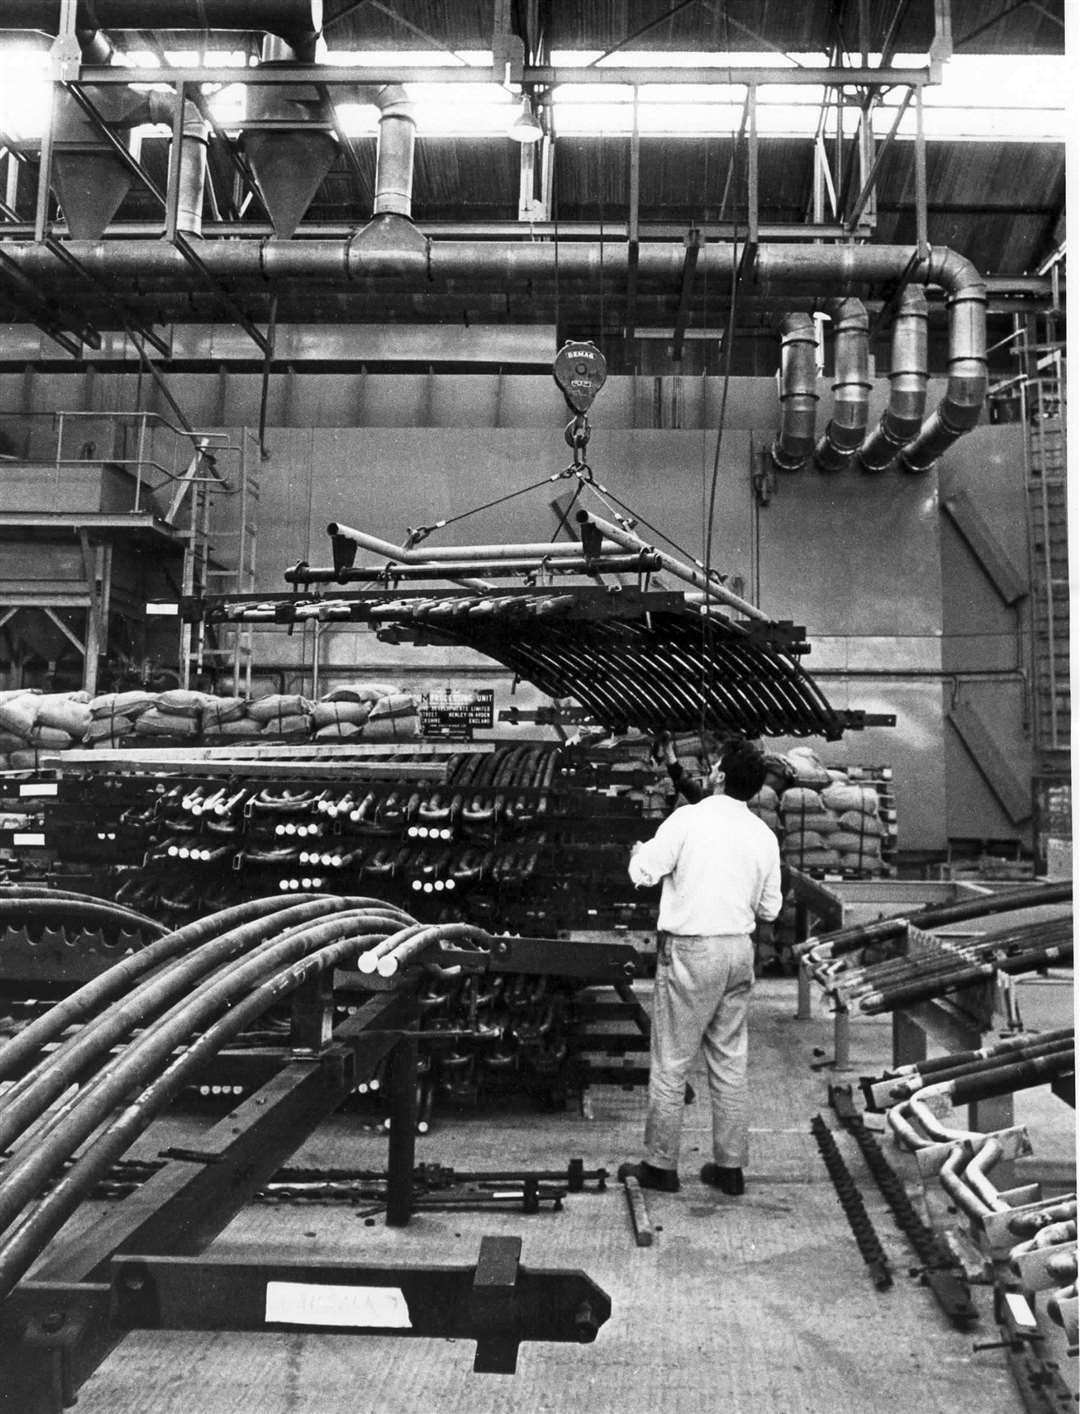 At Dungeness Power Station in October 1971, an operator lifts a boiler element to move it towards the cleaning machine for the removal of rust